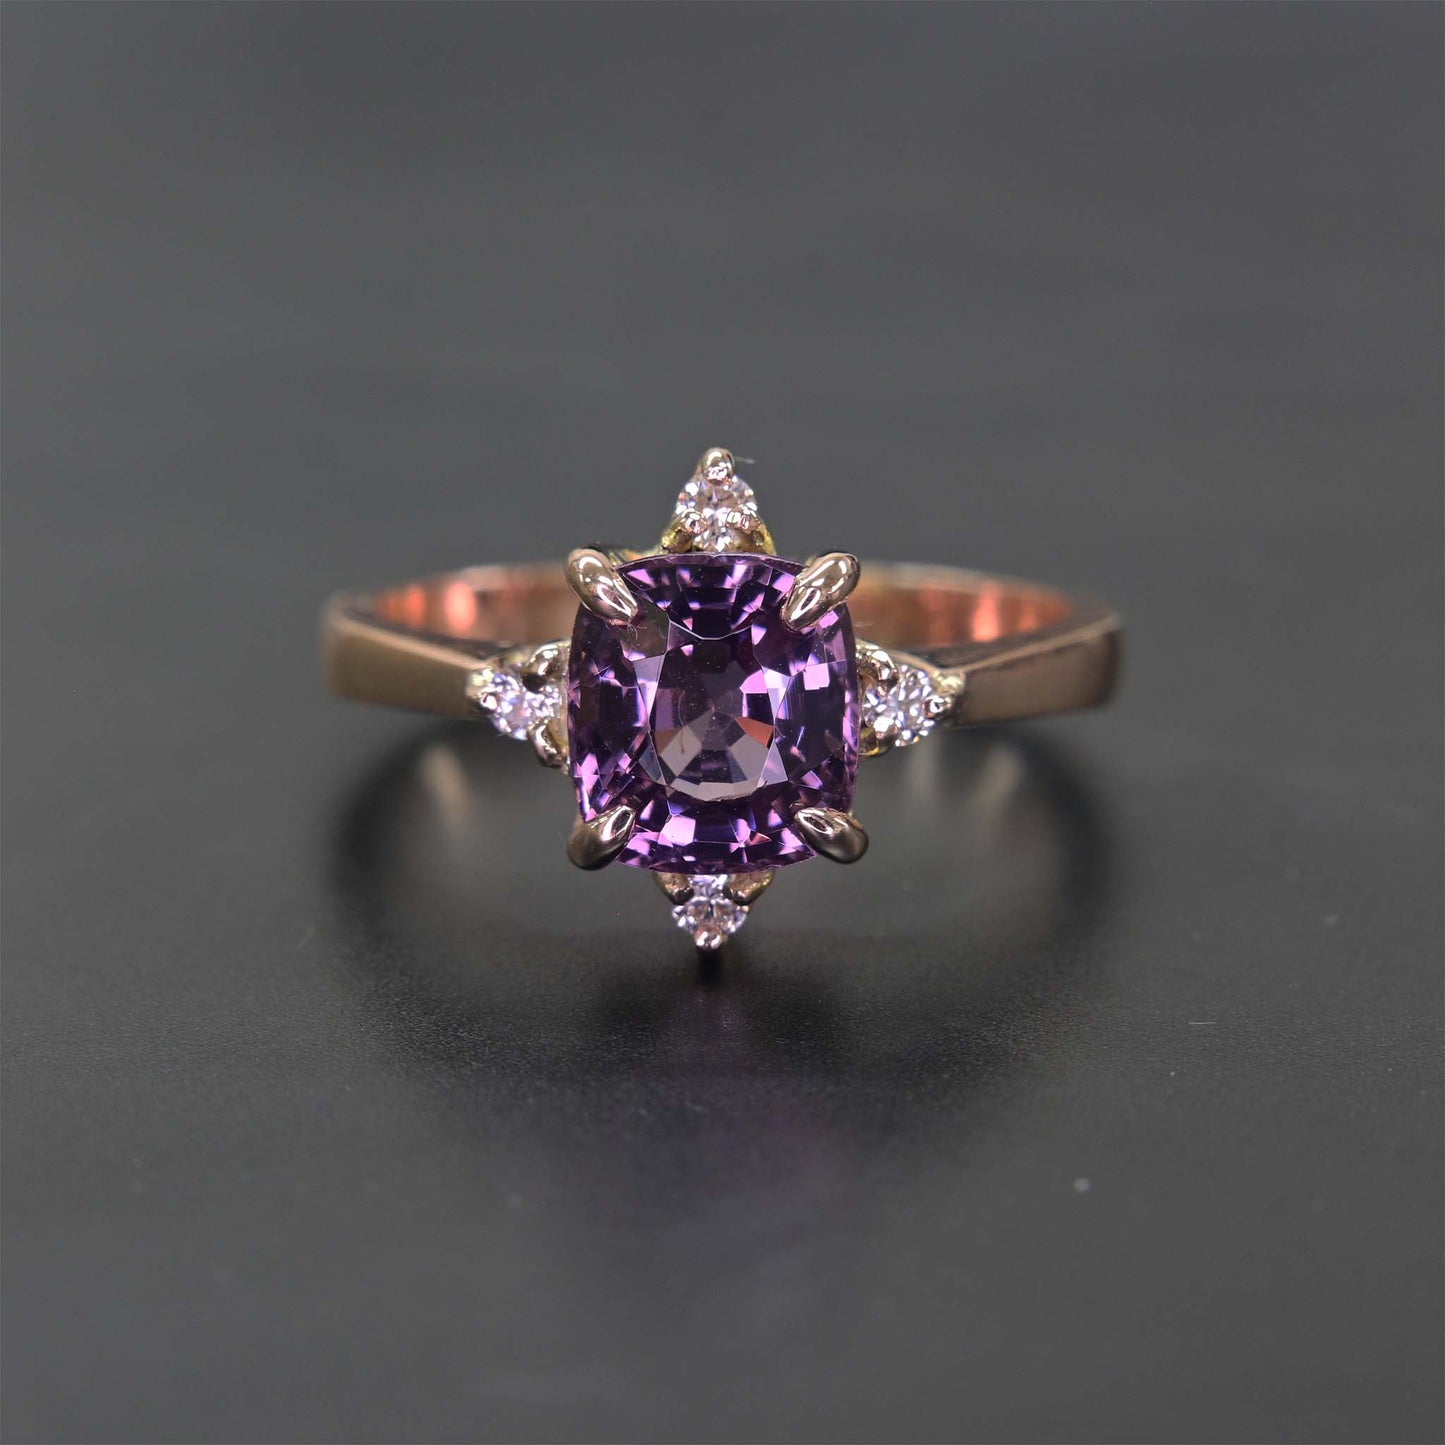 Beautiful spinel ring for engagement and bridal jewelry